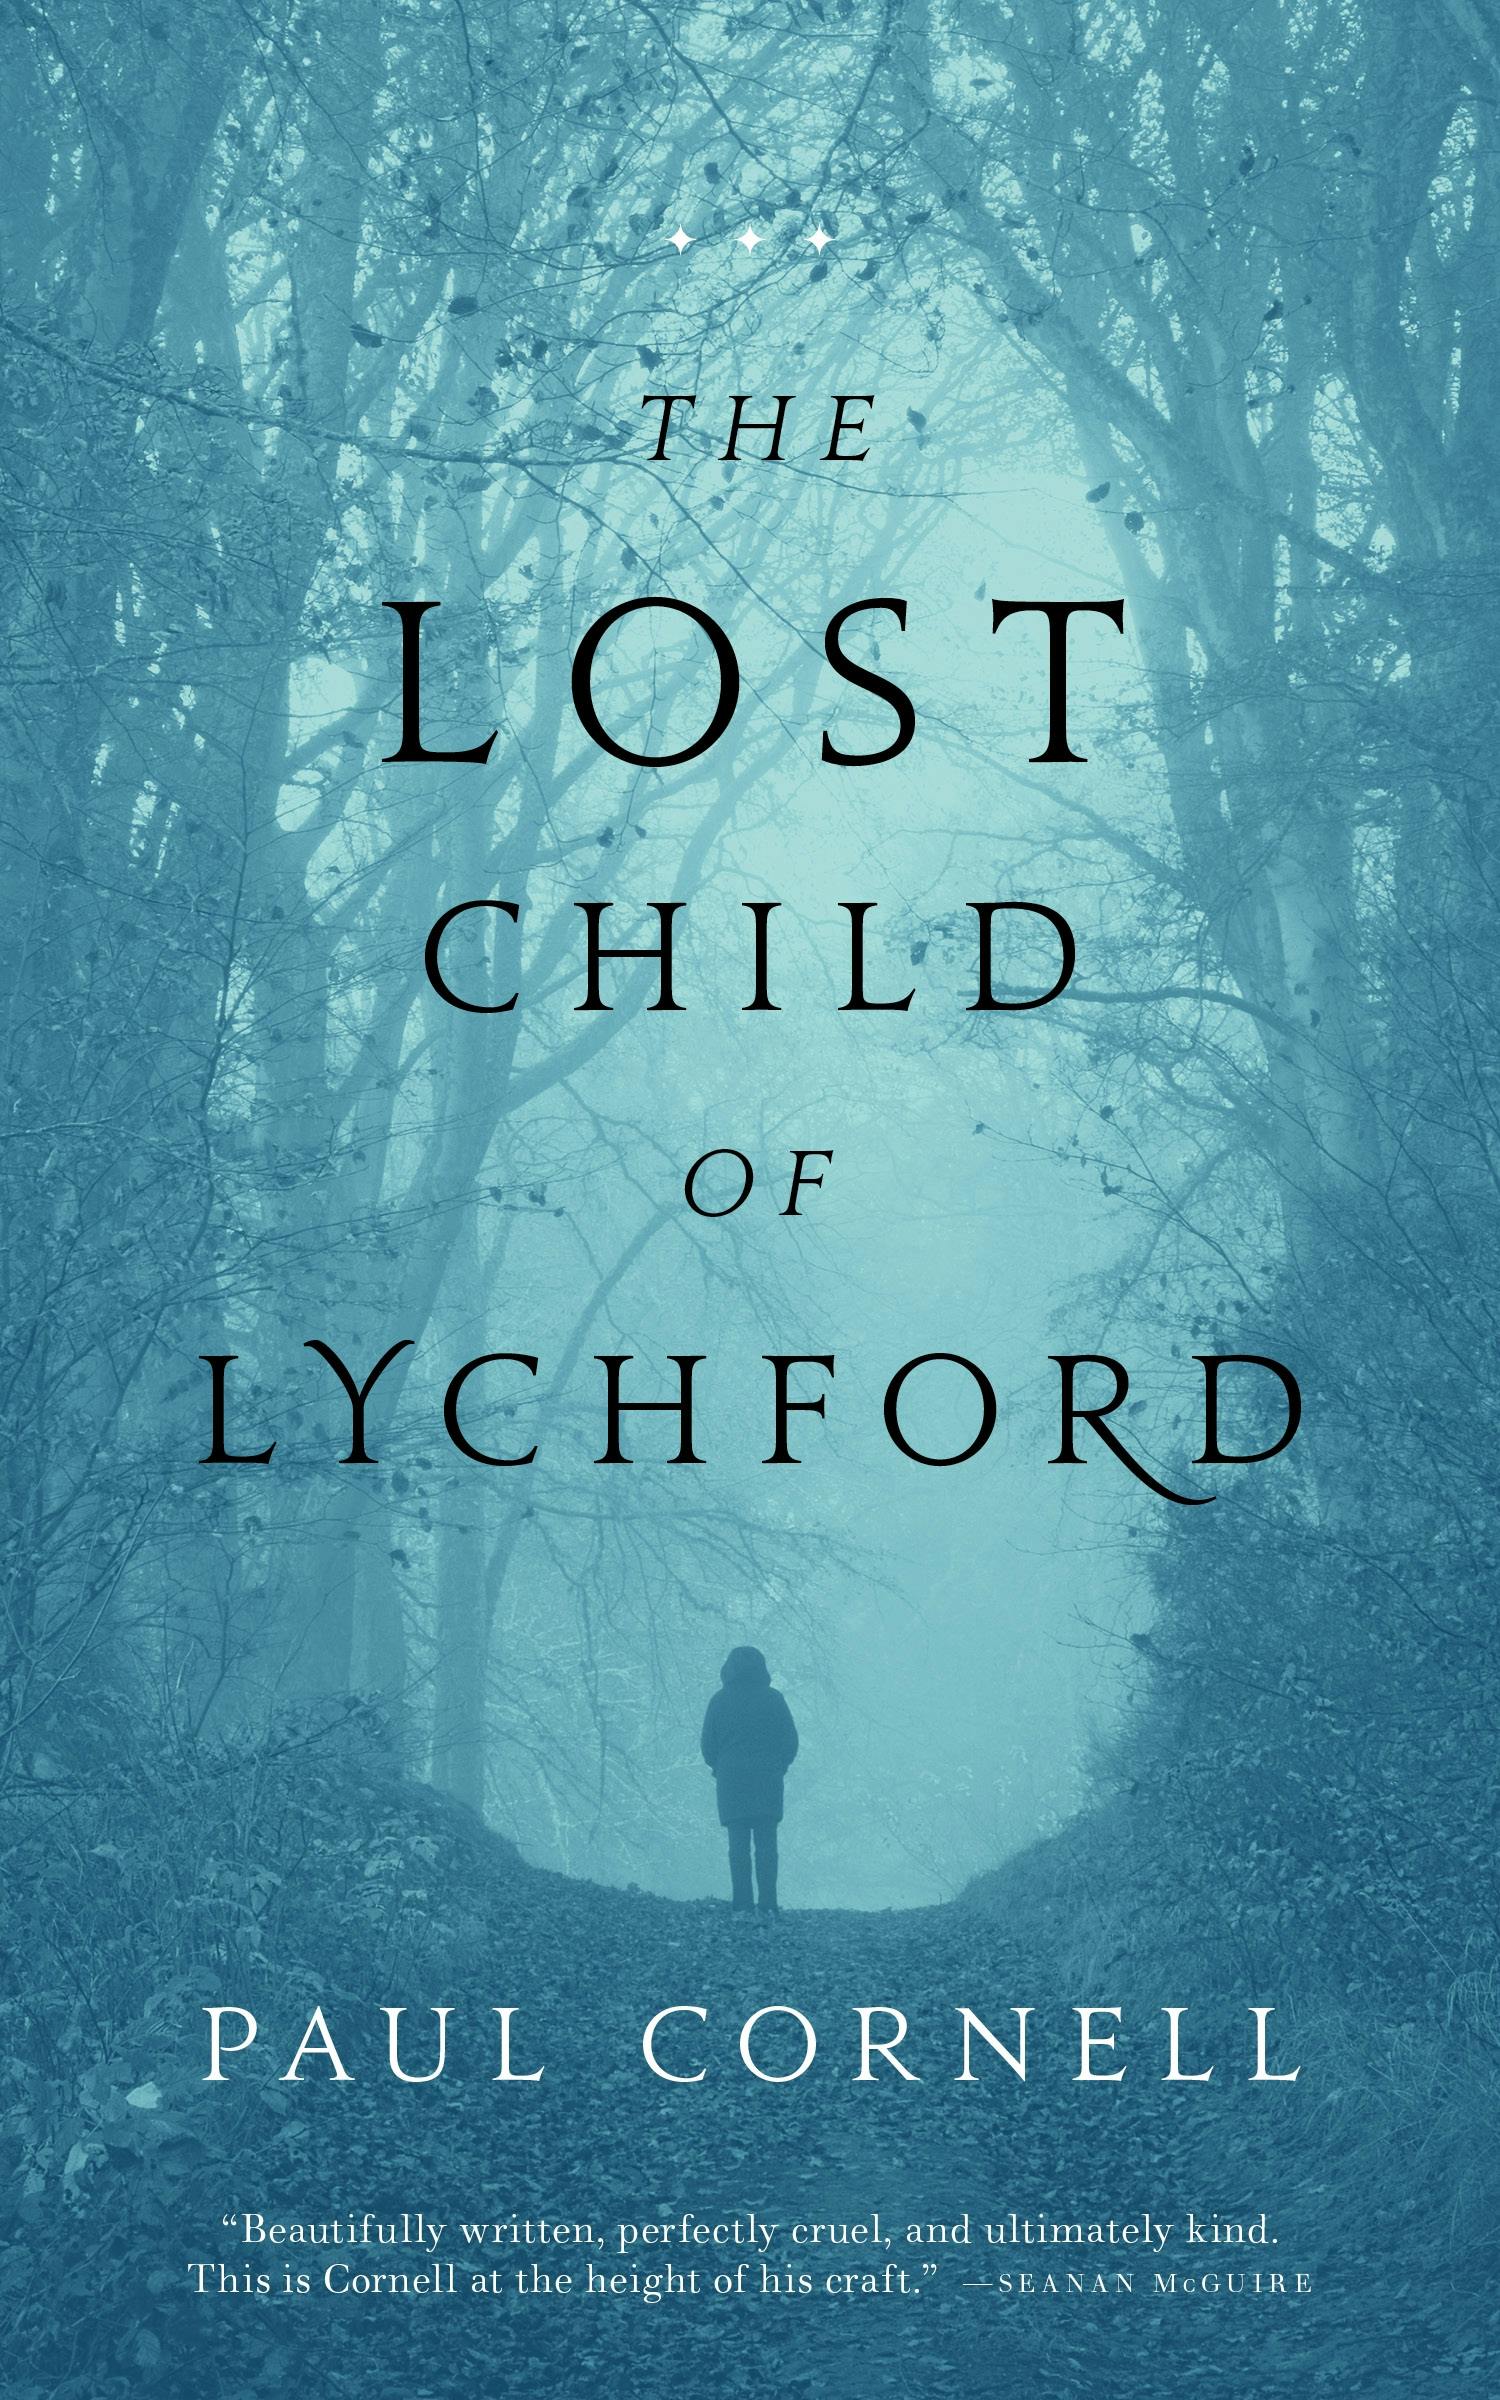 Cover for the book titled as: The Lost Child of Lychford